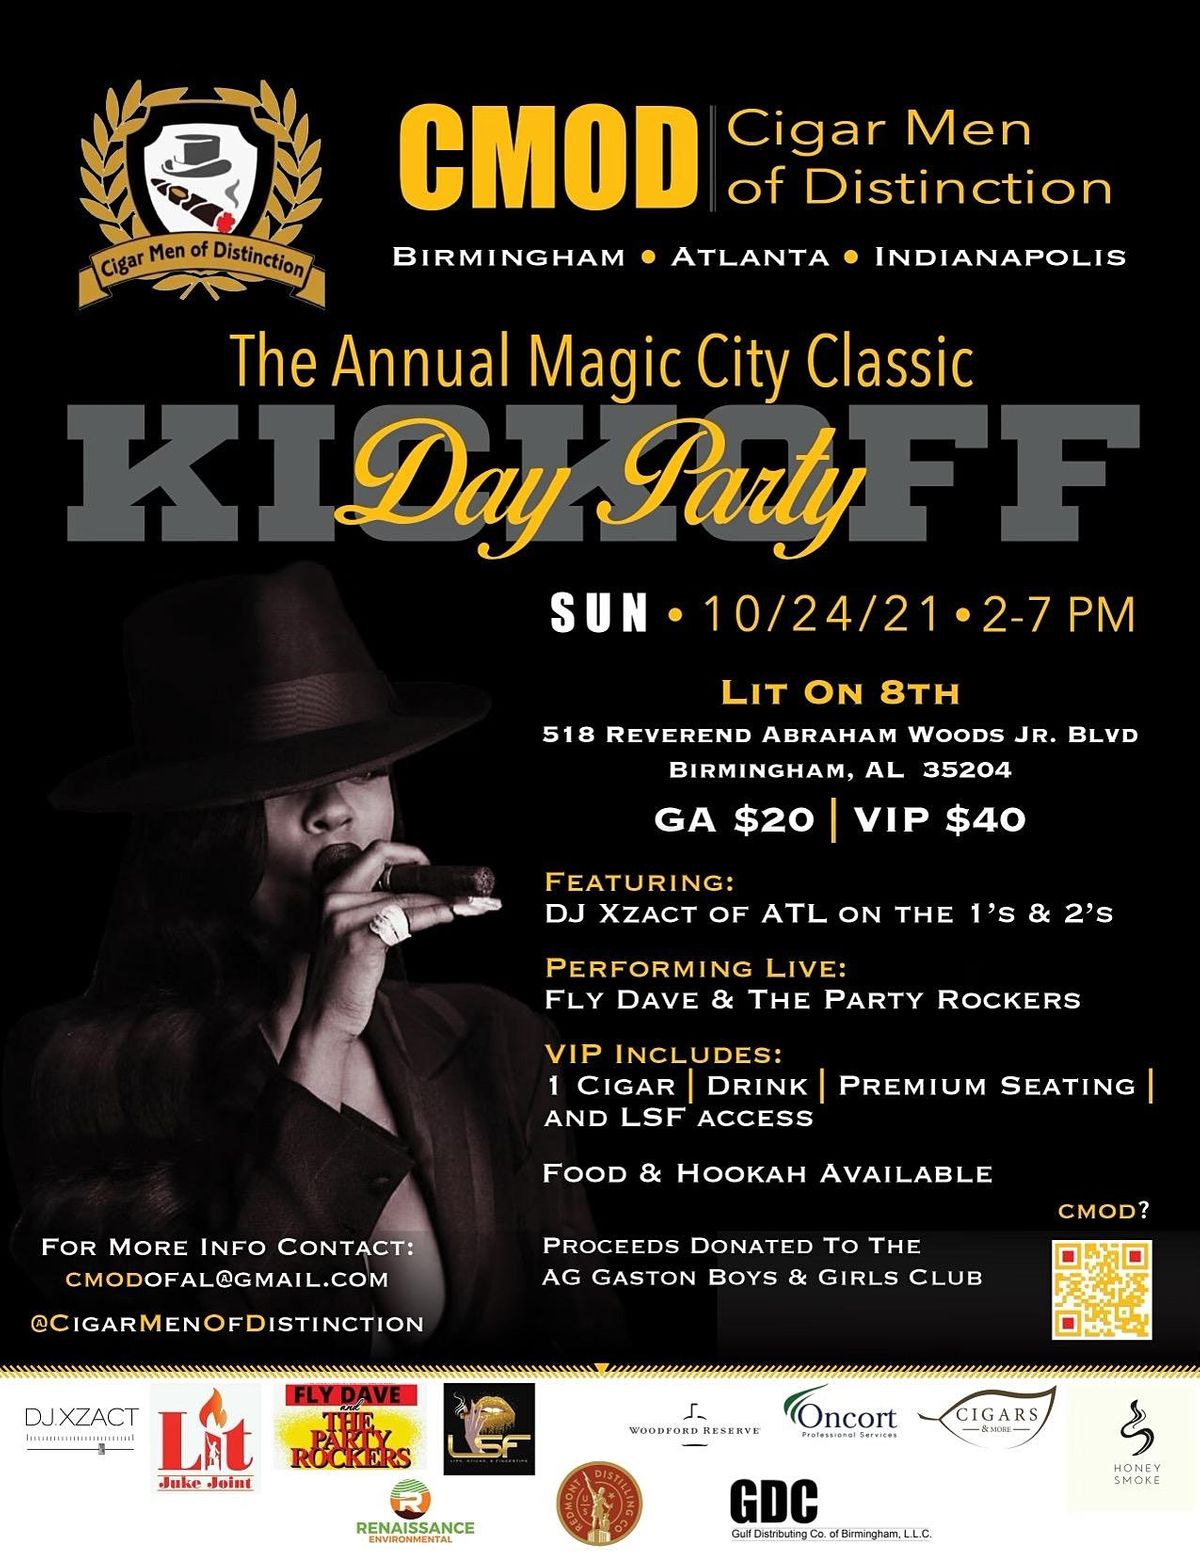 Cigar Men Of Distinction (The Annual Magic City Classic Day Party)